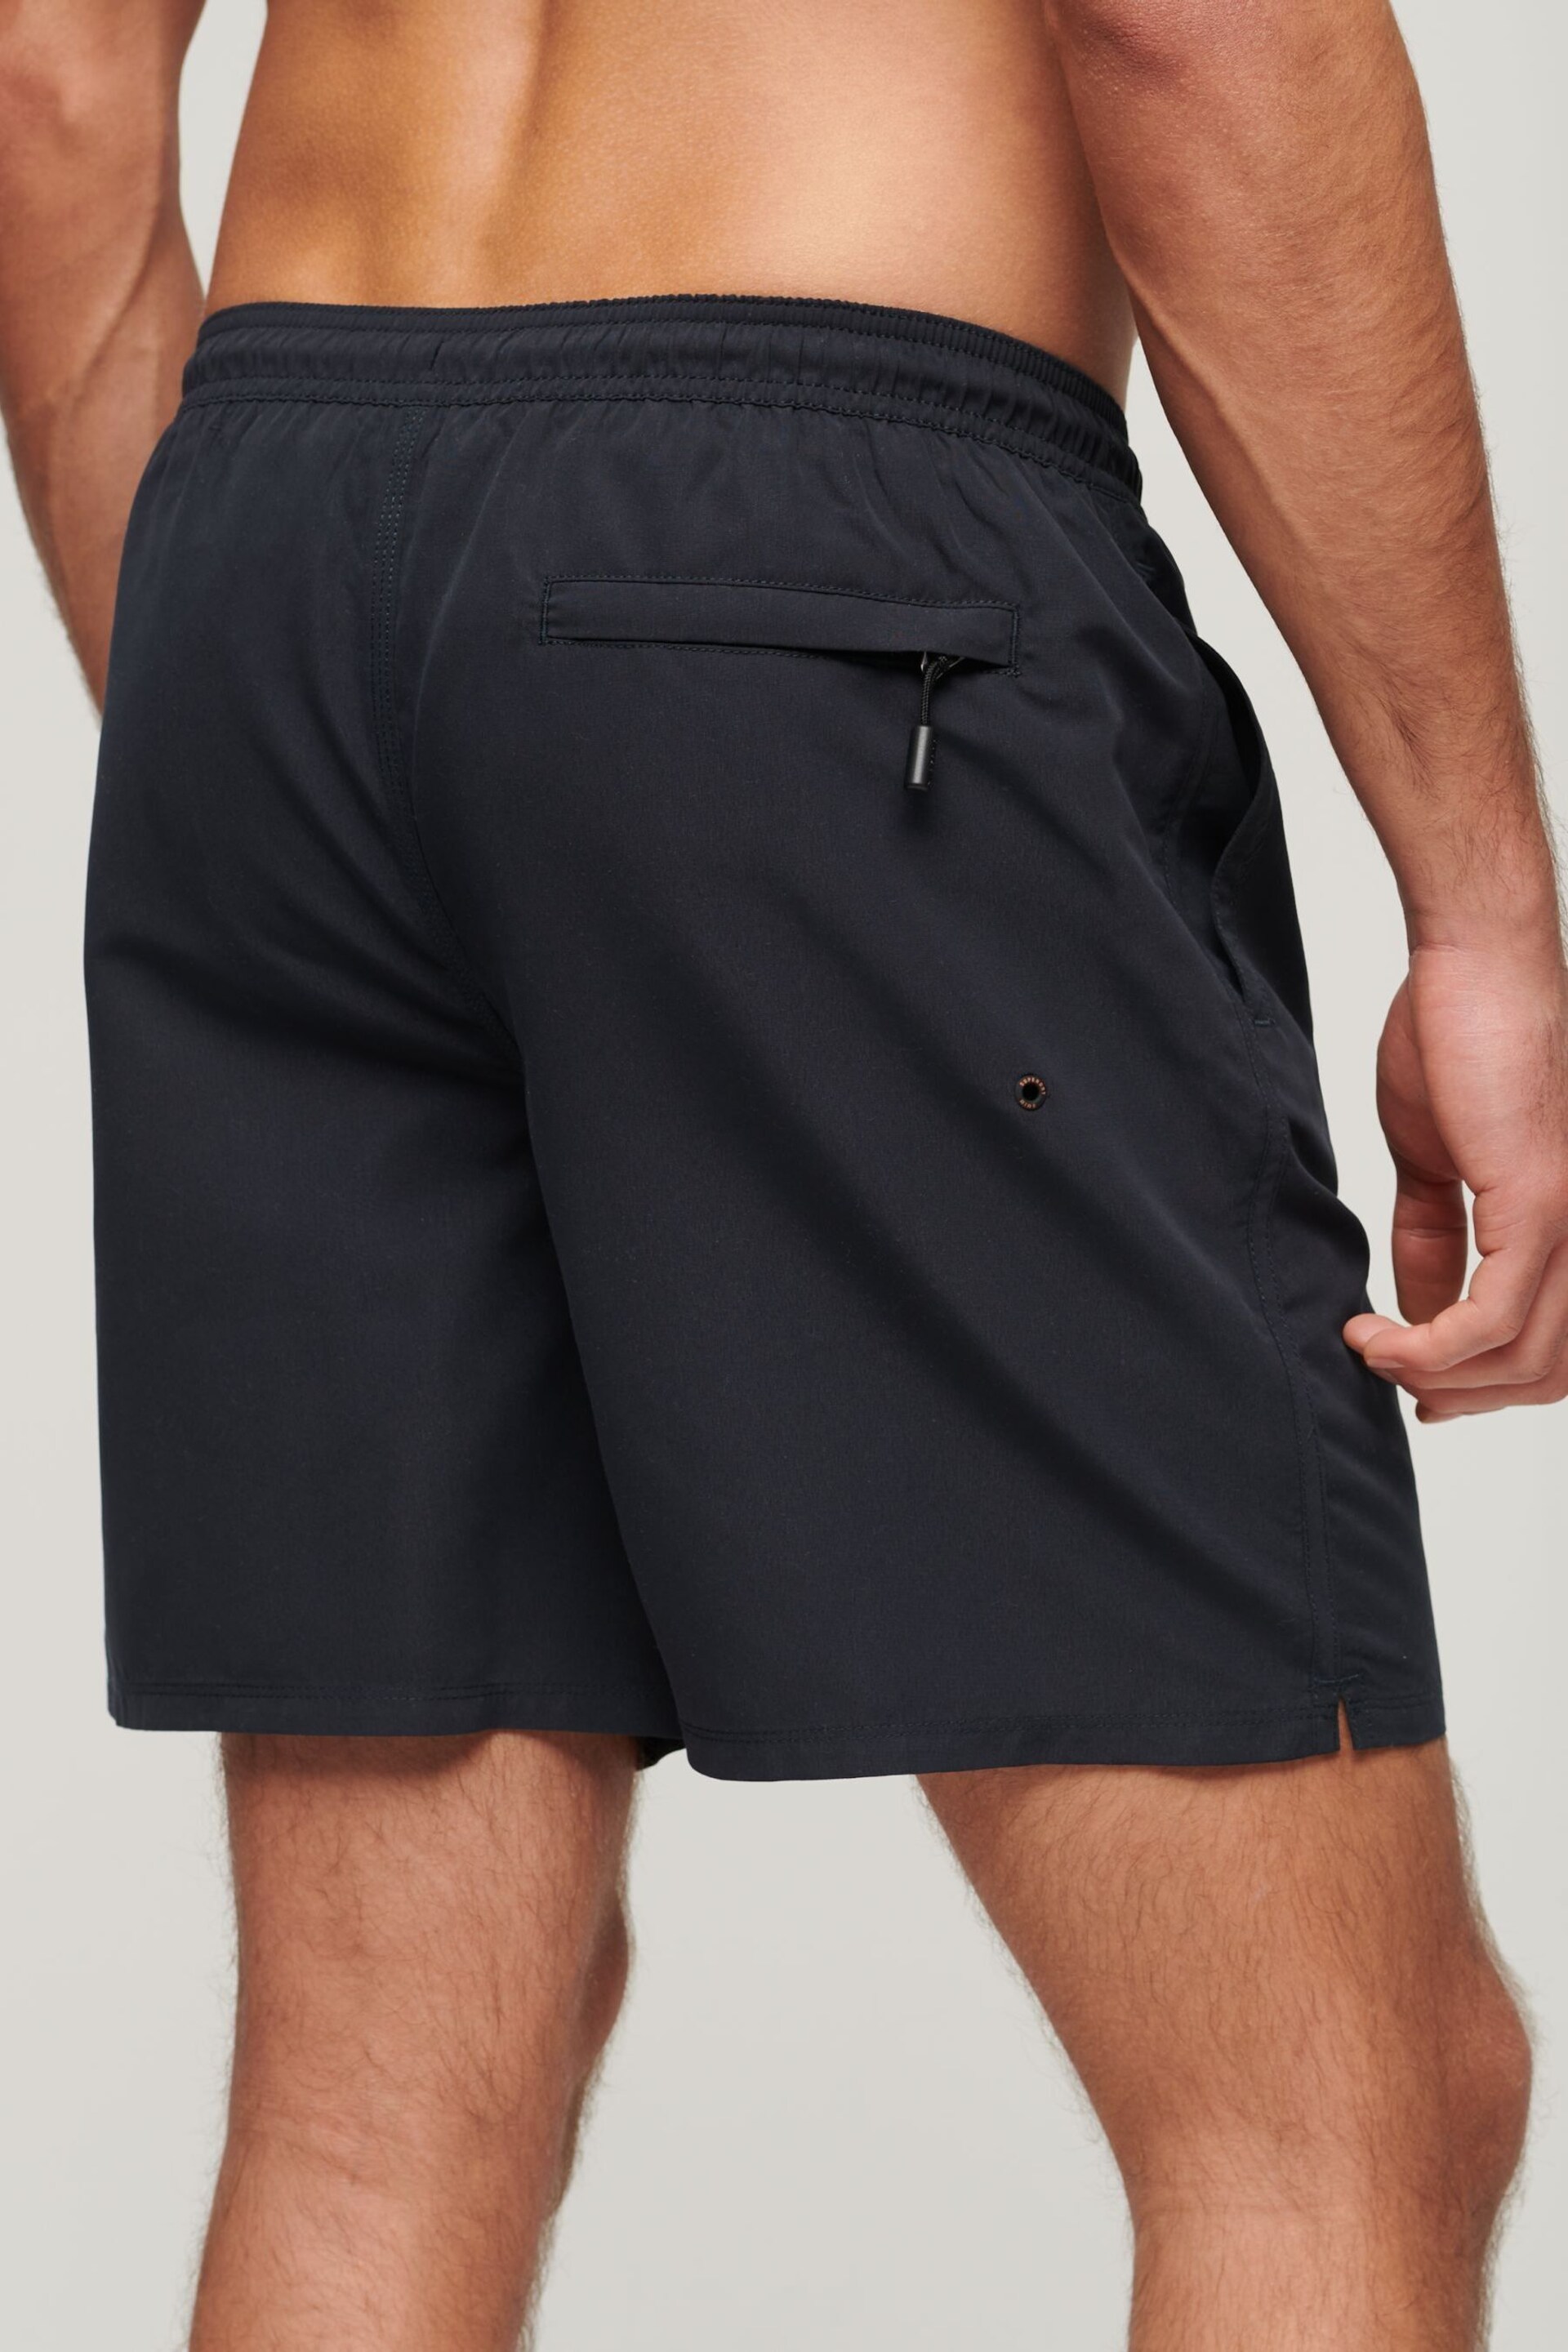 Superdry Navy Sport Graphic 17 Inch Recycled Swim Shorts - Image 2 of 2